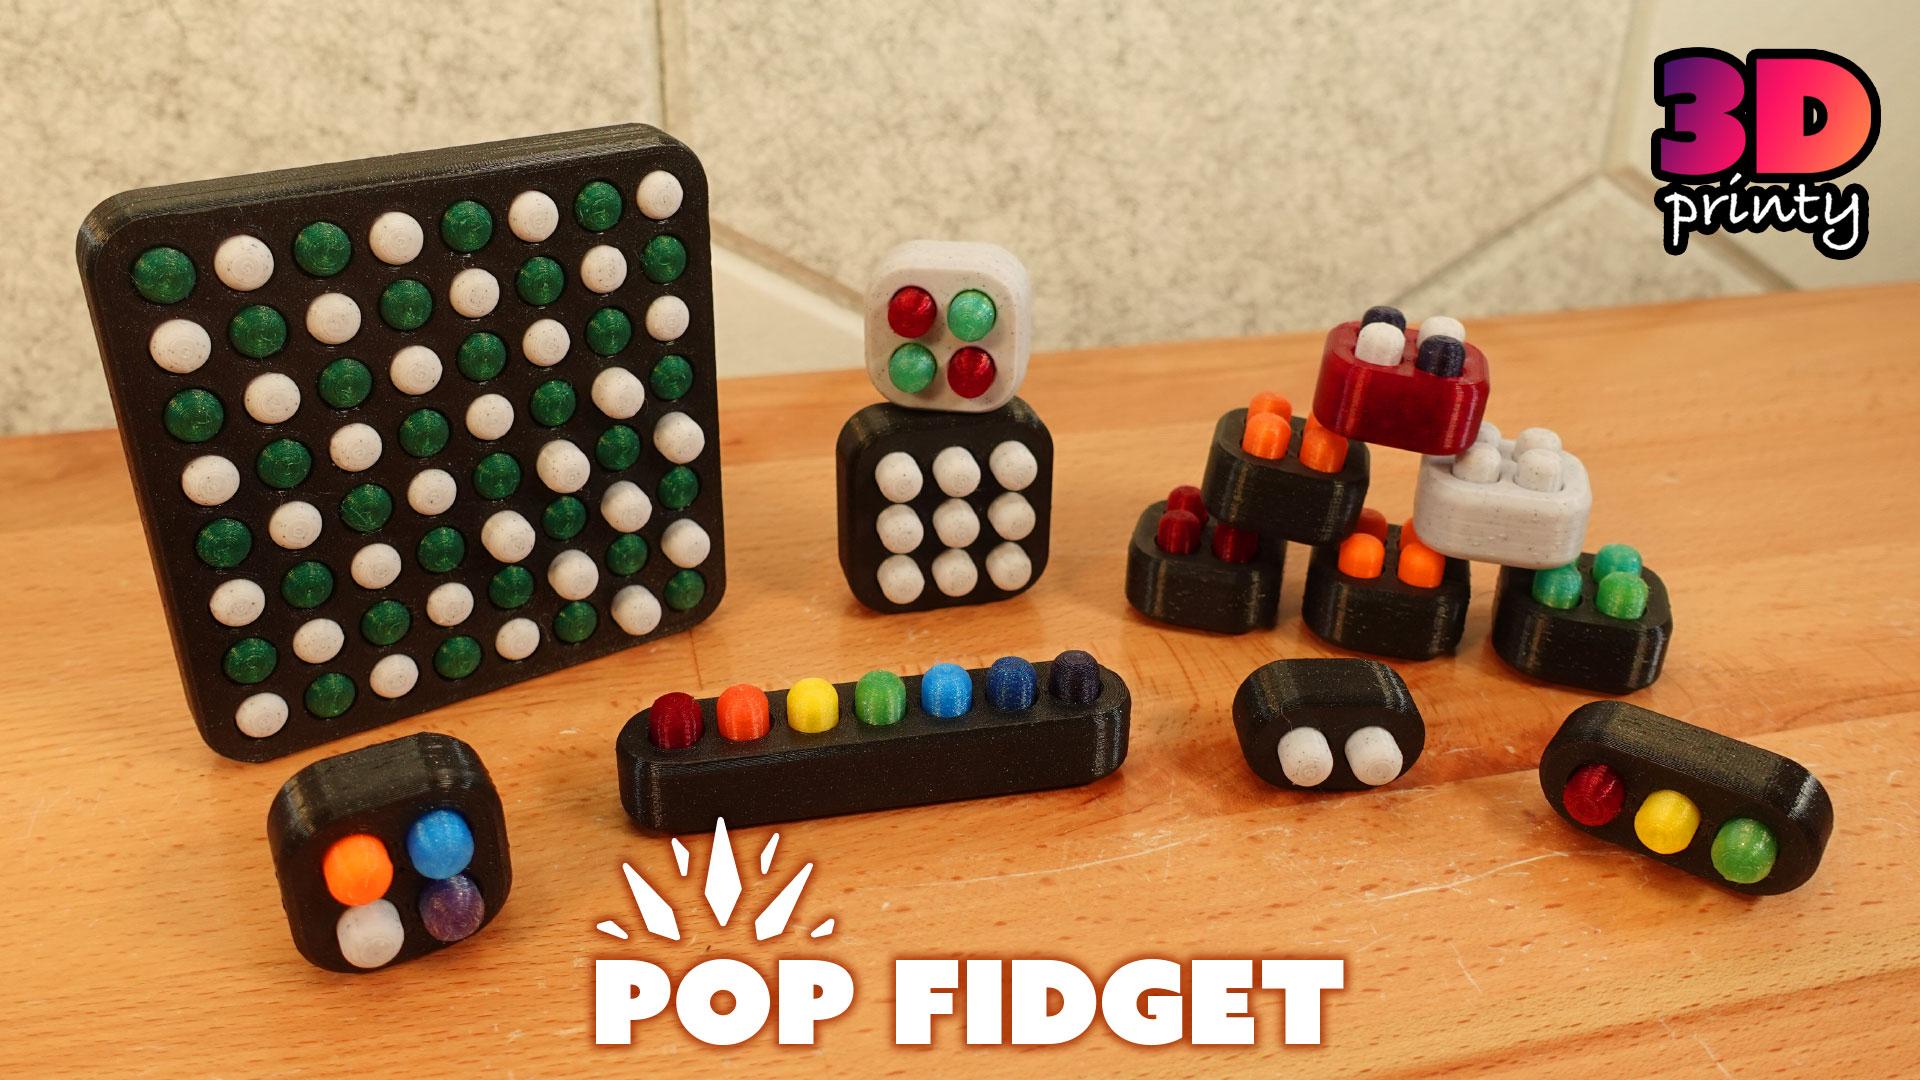 3D printed pop fidgets in many different sizes.